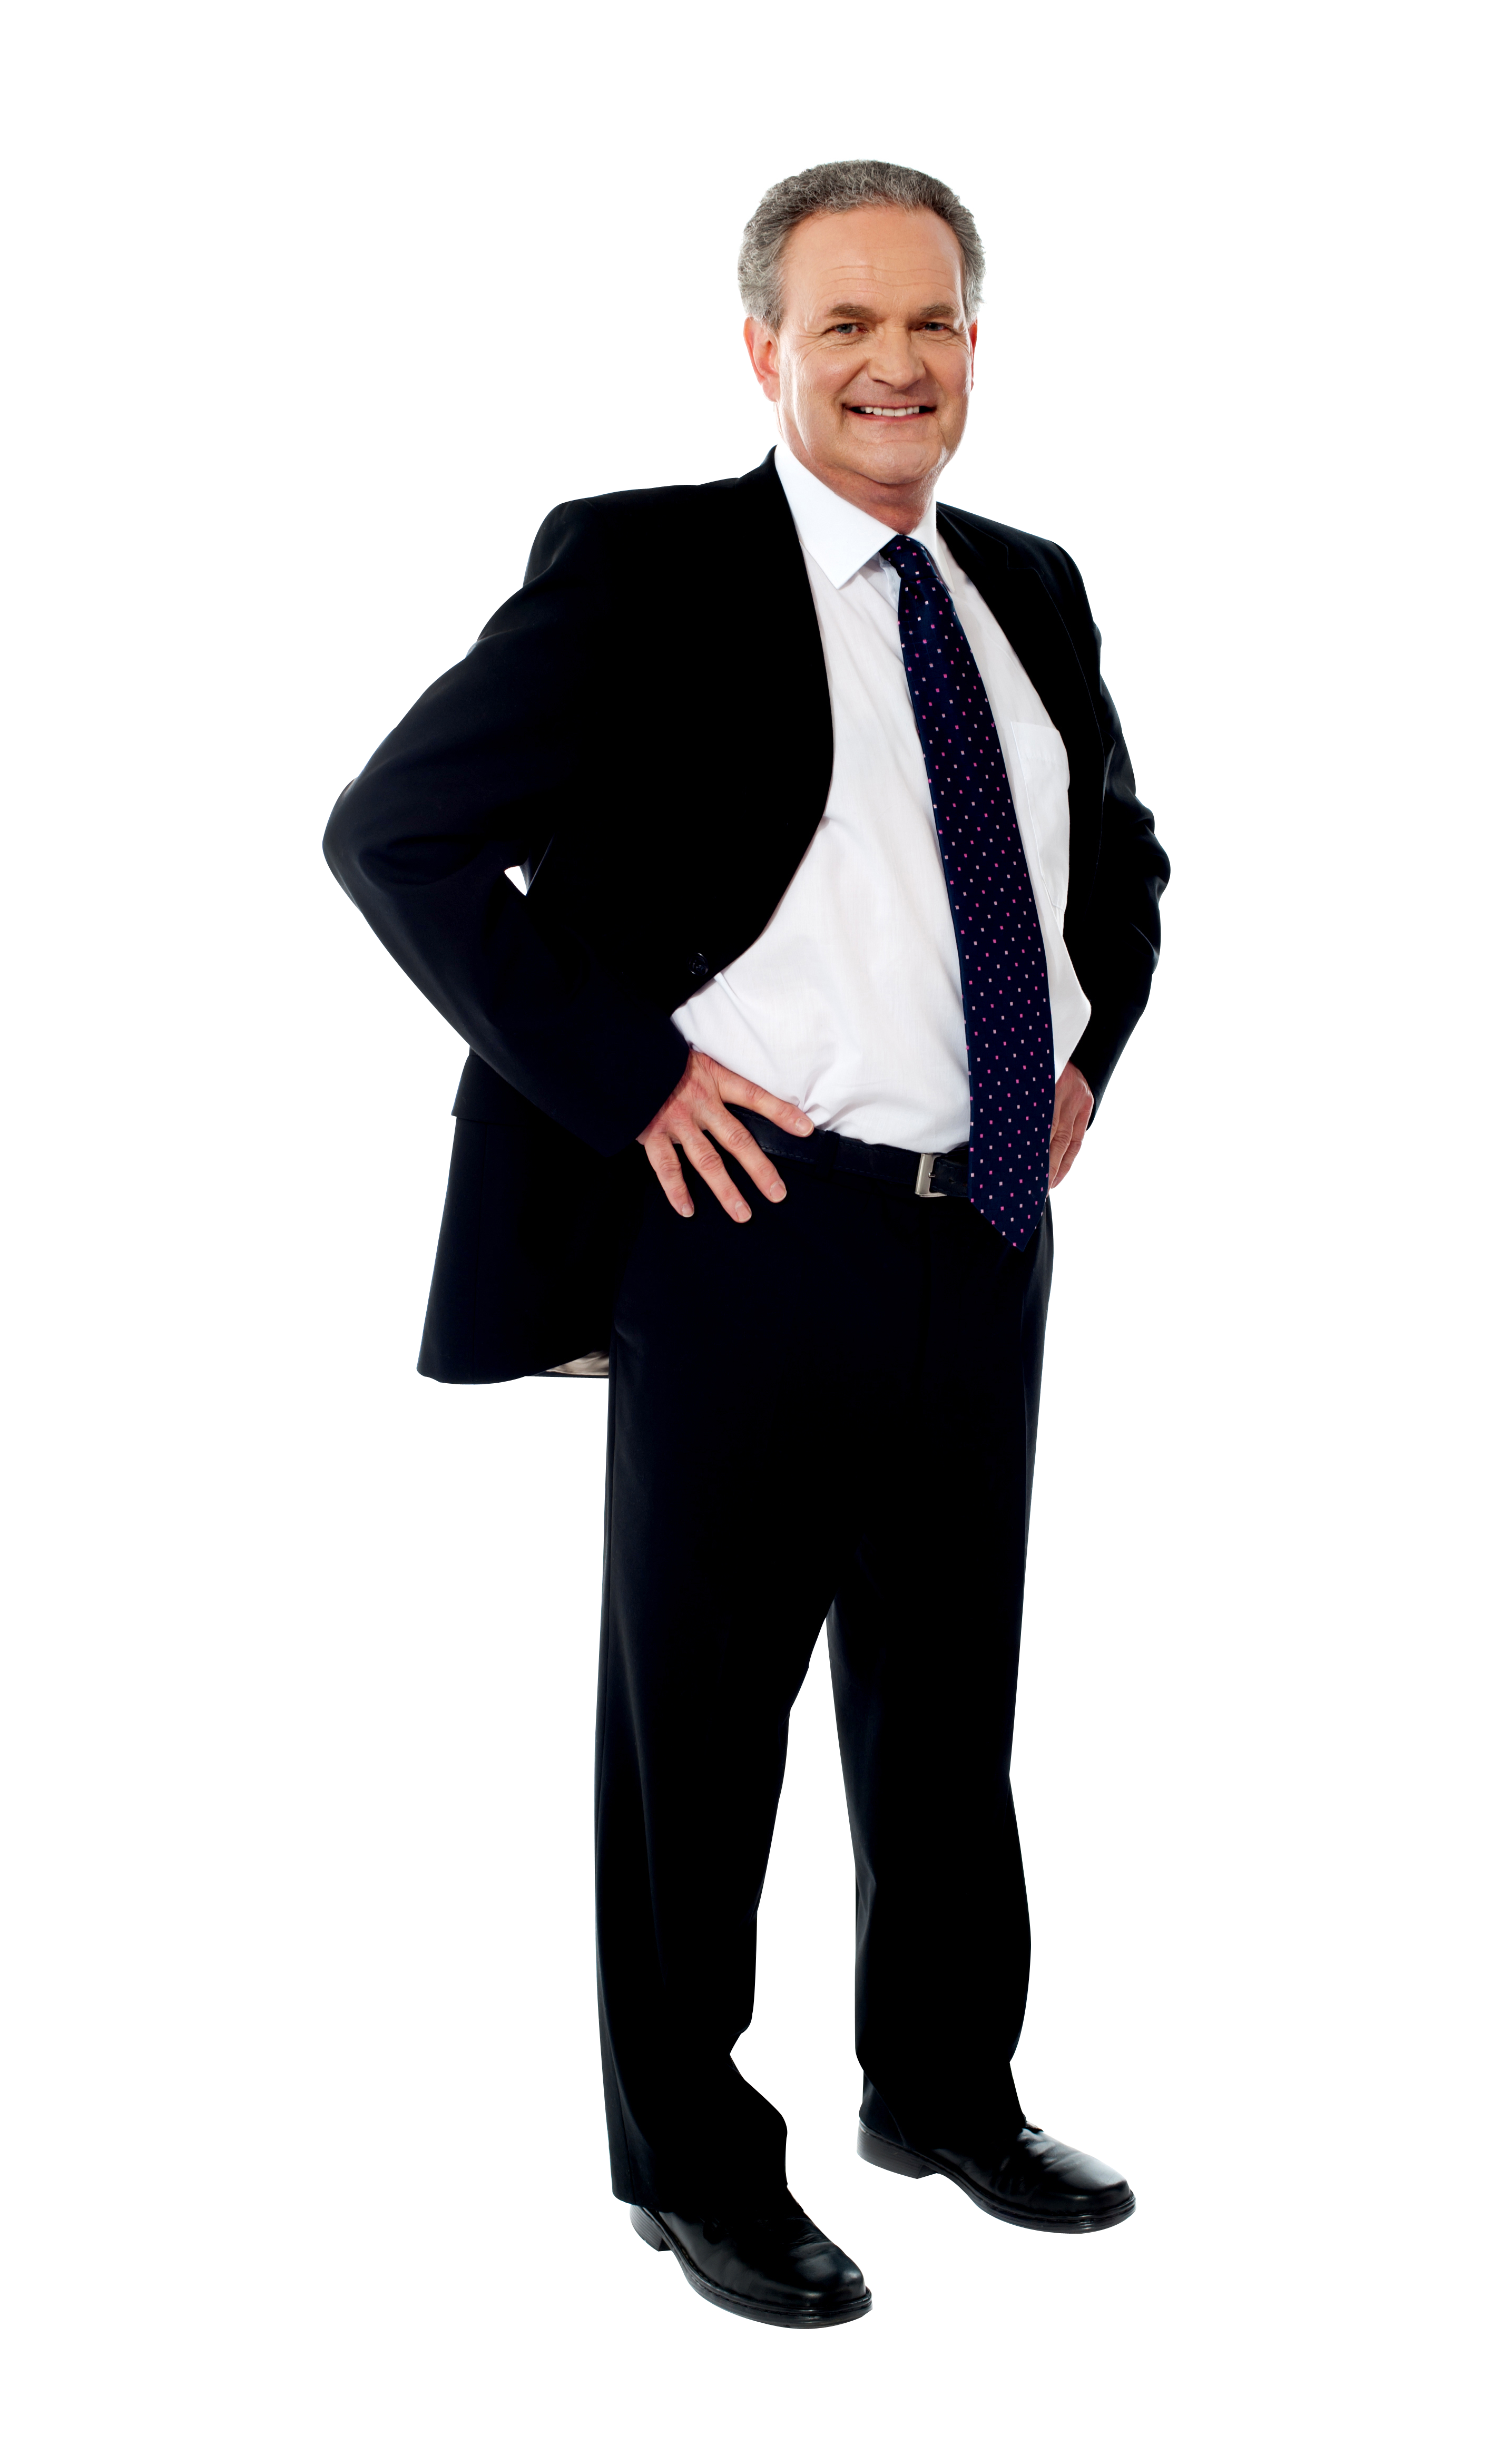 Download Men In Suit PNG Image for Free